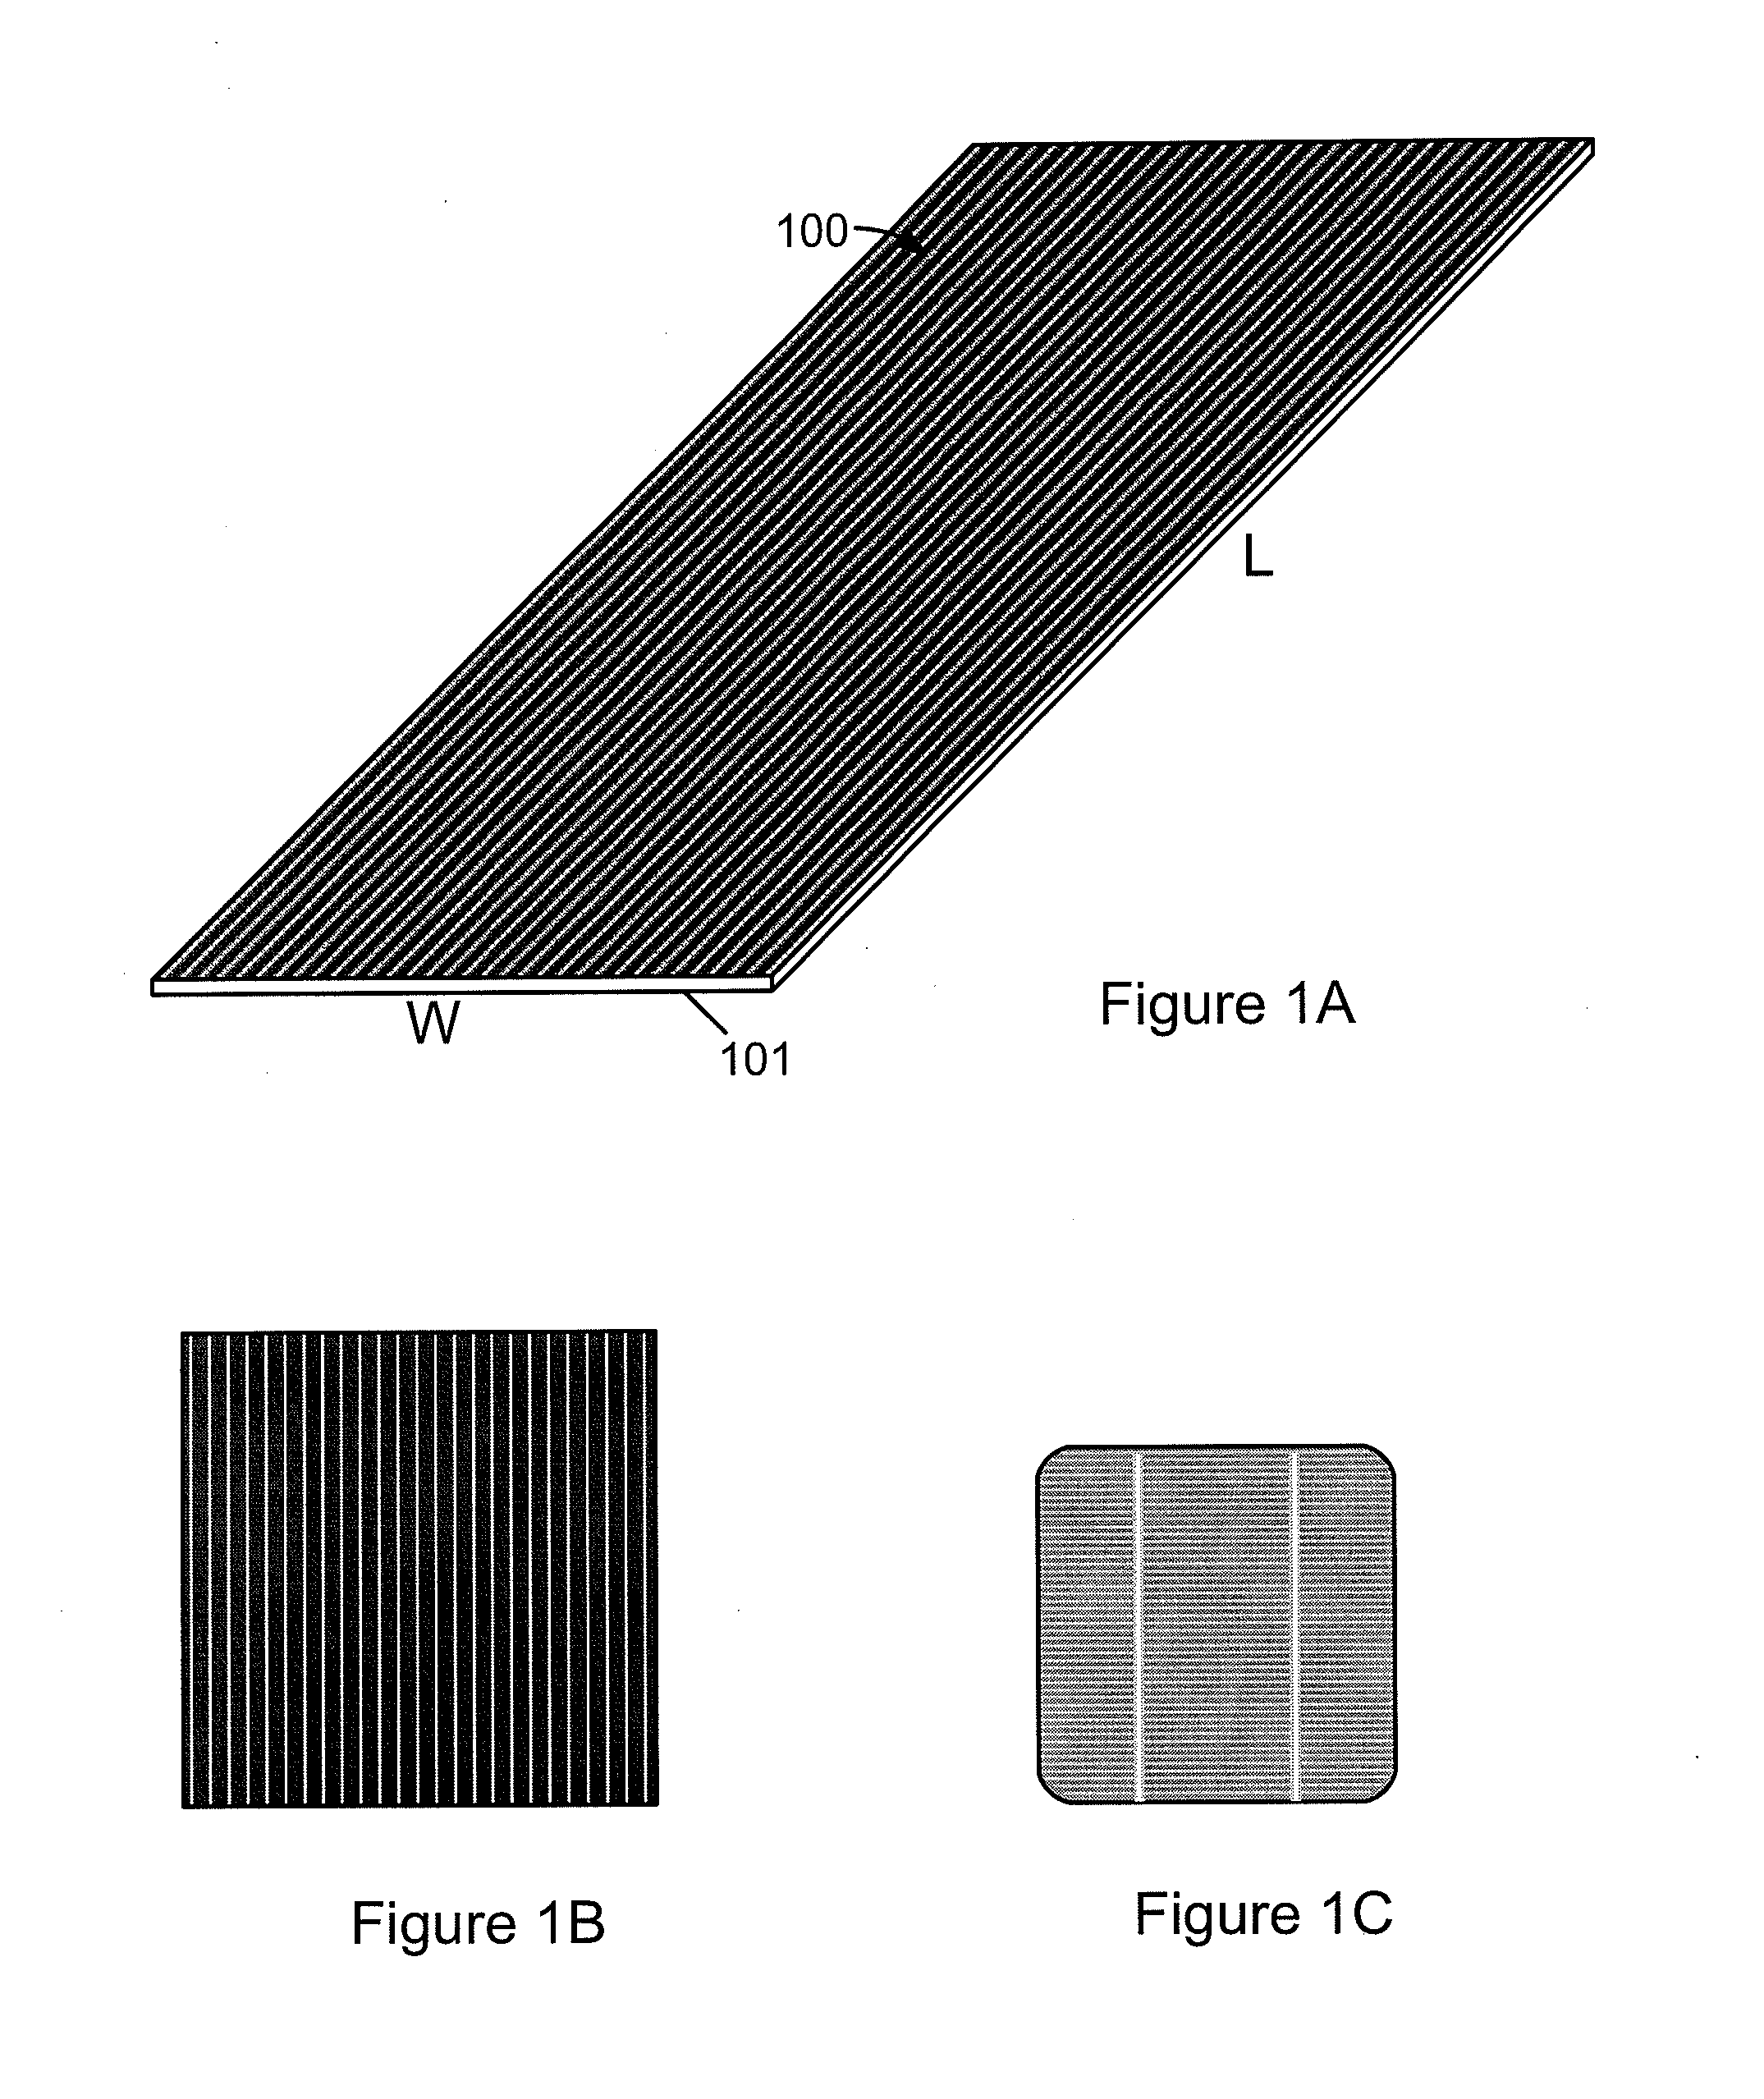 Nanowire enhanced transparent conductive oxide for thin film photovoltaic devices